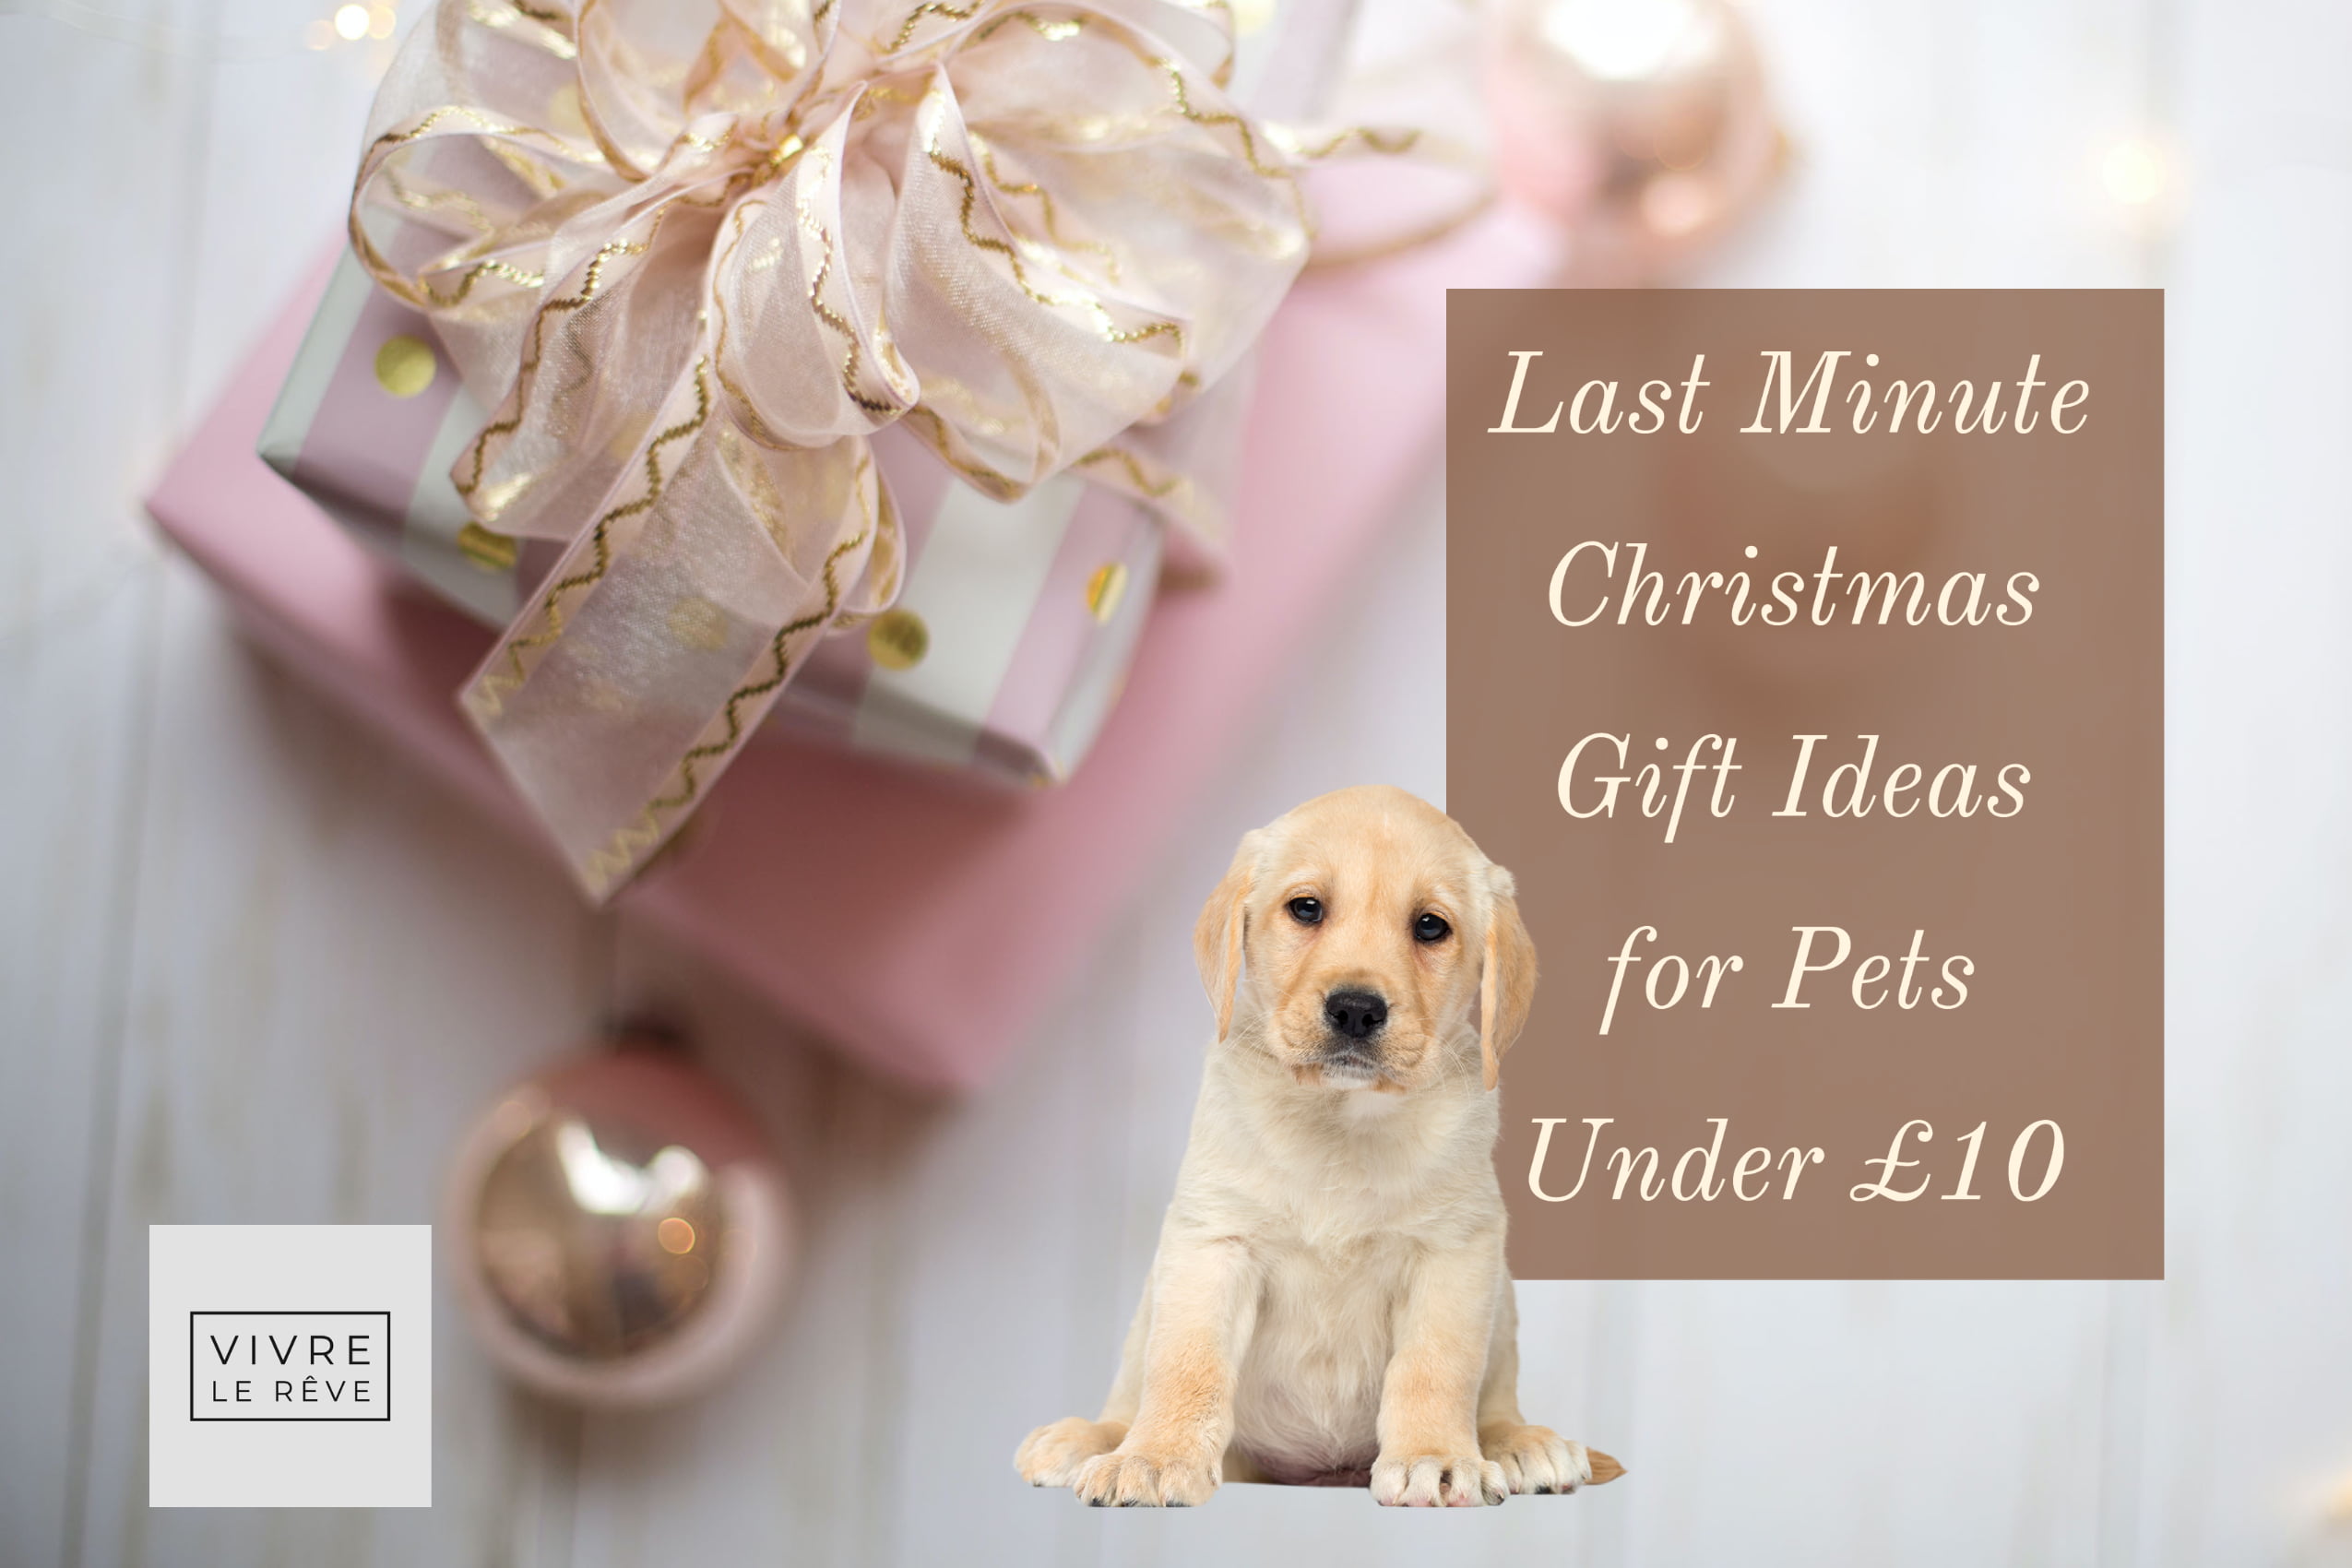 Last Minute Christmas Gift Ideas for Pets Under £10